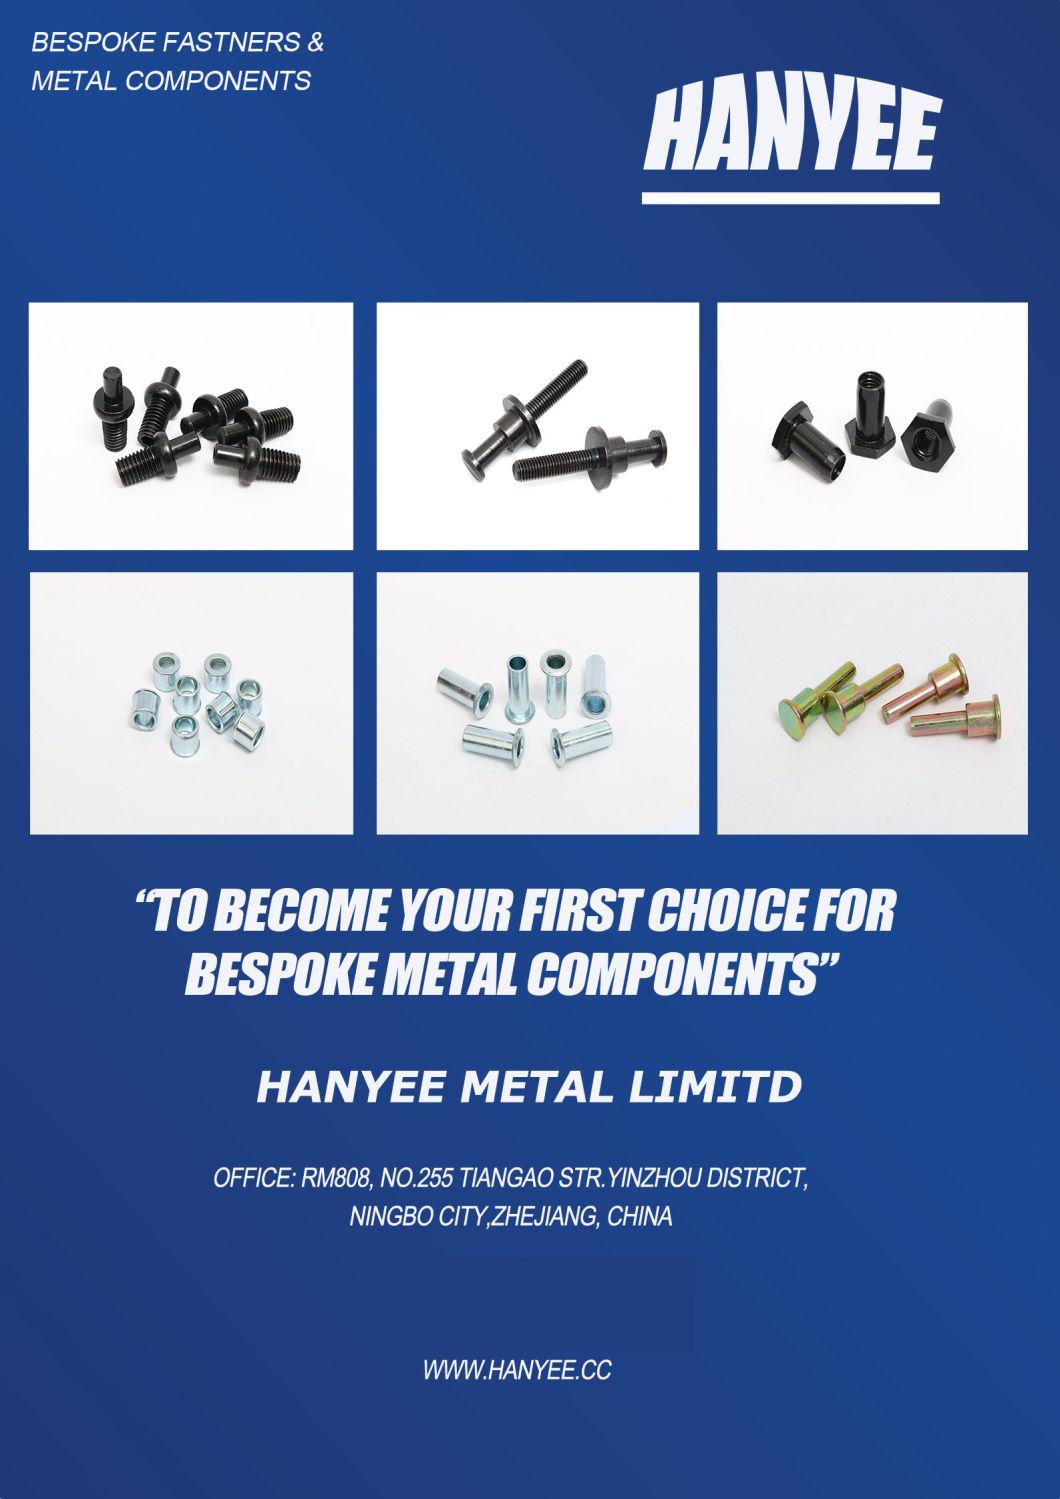 ISO 9001 High Quantity Znic Plating Delivery 15-30days Customized Rivet for Machinery by Hanyee Metal